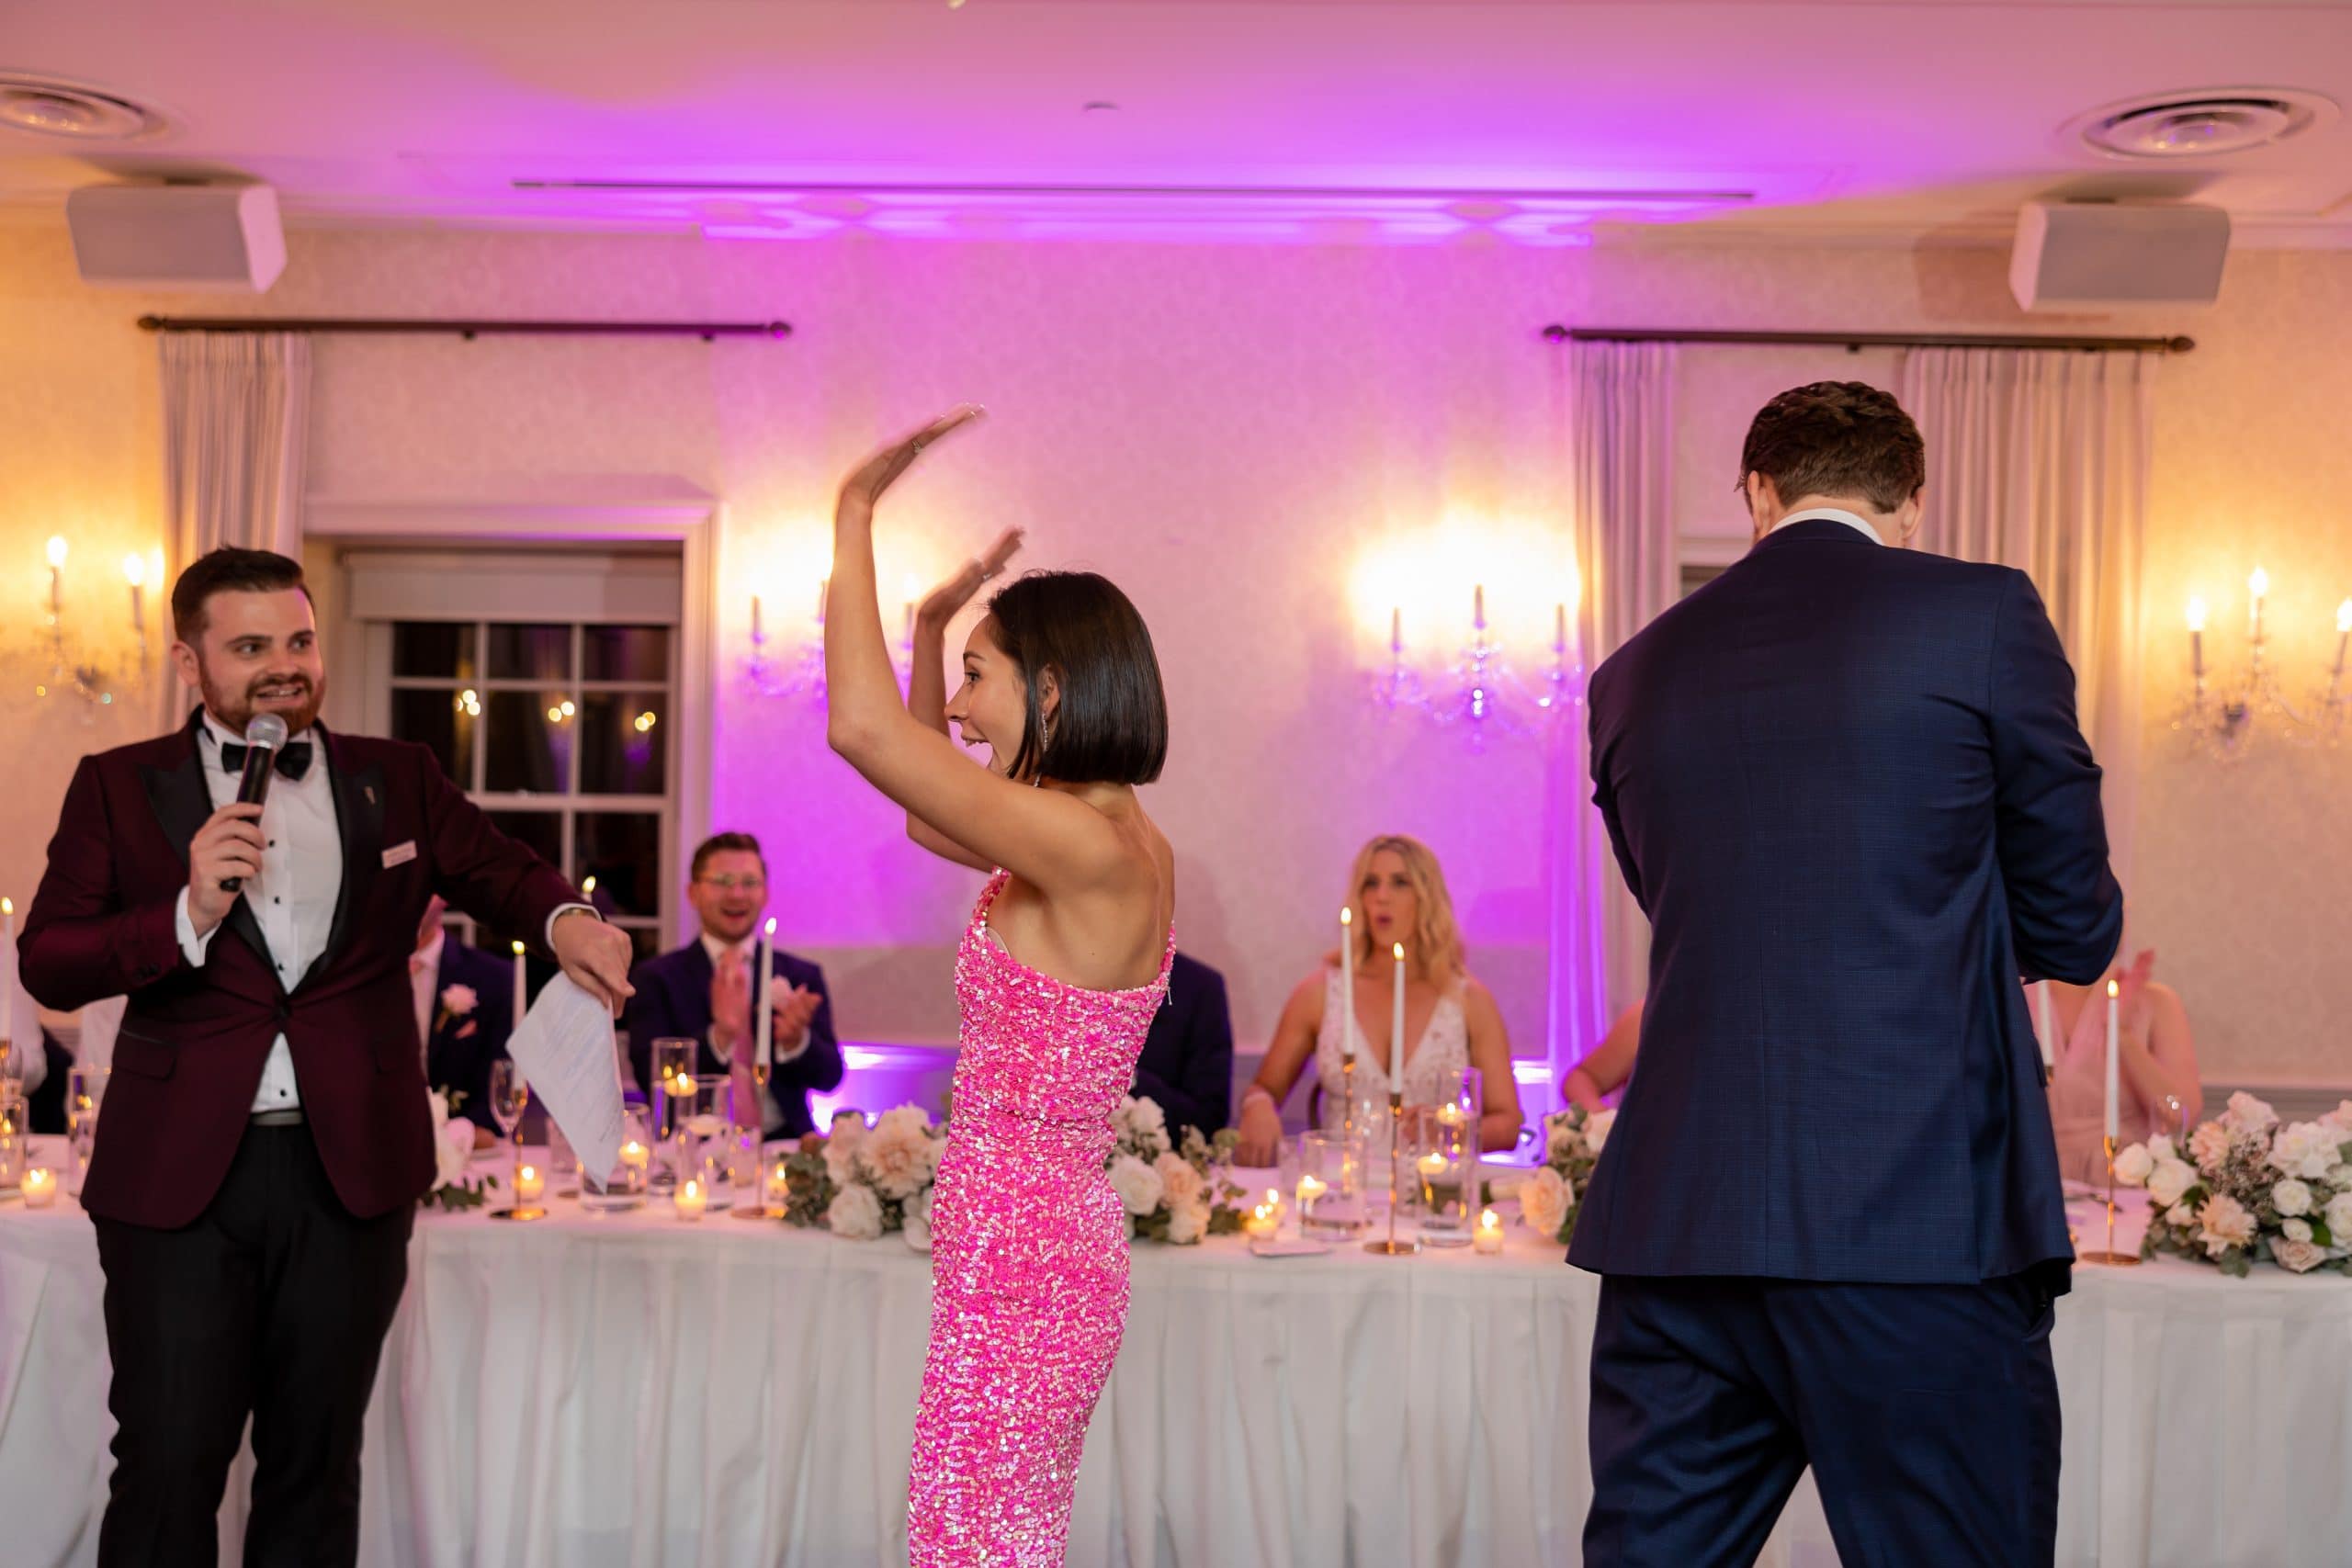 Lady in dancefloor with her hands up playing a game